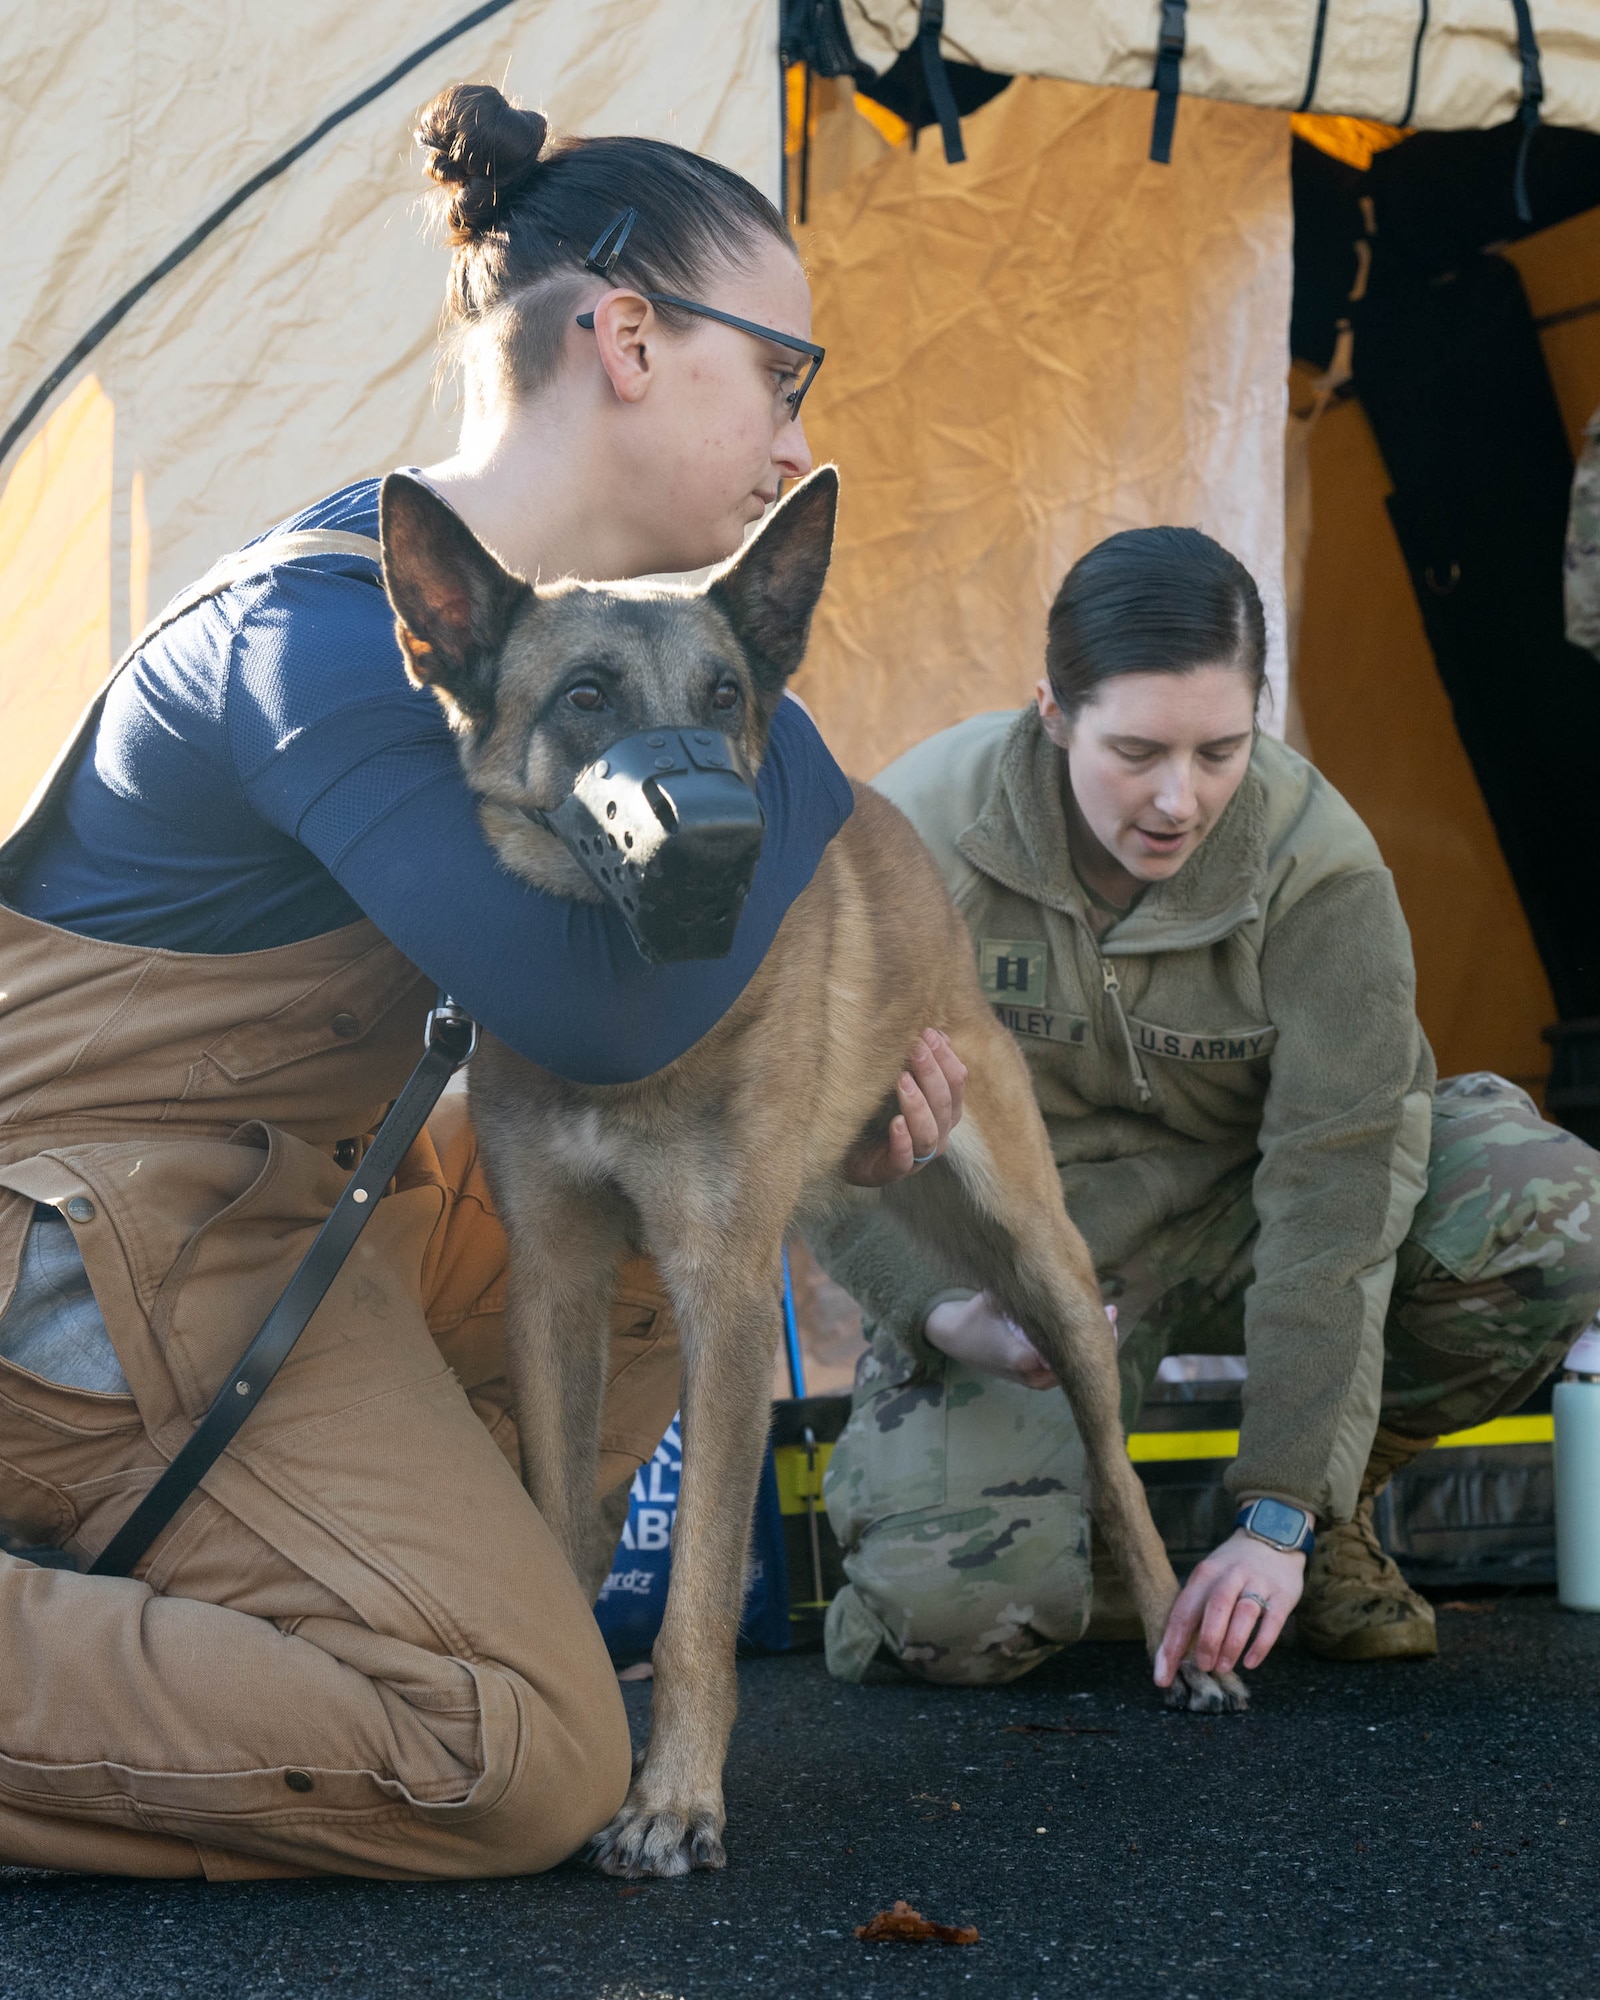 U.S. Army Capt. Alicia Bailey, right, Dover Air Force Base Veterinary Treatment Facility officer in charge, and U.S. Air Force Senior Airman Courtney Burns, 436th Security Forces Squadron military working dog handler, demonstrate decontamination techniques on Military Working Dog Zorro during a training session at Dover Air Force Base, Delaware, Jan. 10, 2024. Members of the 436th Security Forces Squadron MWD section along with the Dover AFB Veterinary Treatment Facility and the 436th Medical Group Warm Zone team held a joint training session to practice the skills necessary to decontaminate MWDs and possibly save their lives in the aftermath of a nuclear, biological or chemical attack or spill. (U.S. Air Force photo by Mauricio Campino)